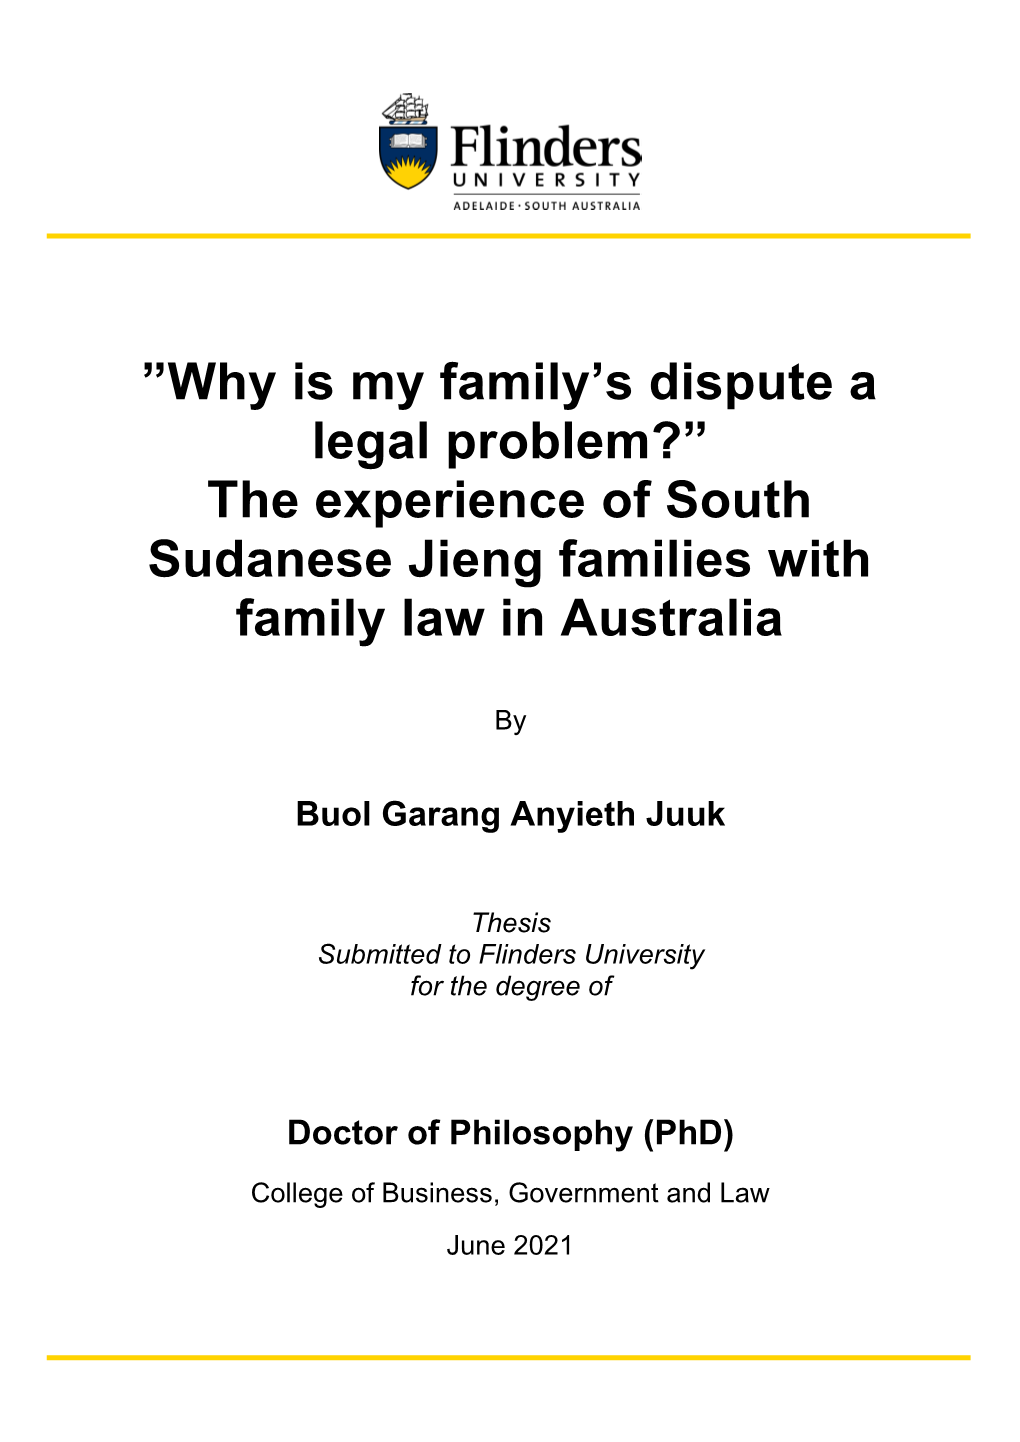 The Experience of South Sudanese Jieng Families with Family Law in Australia